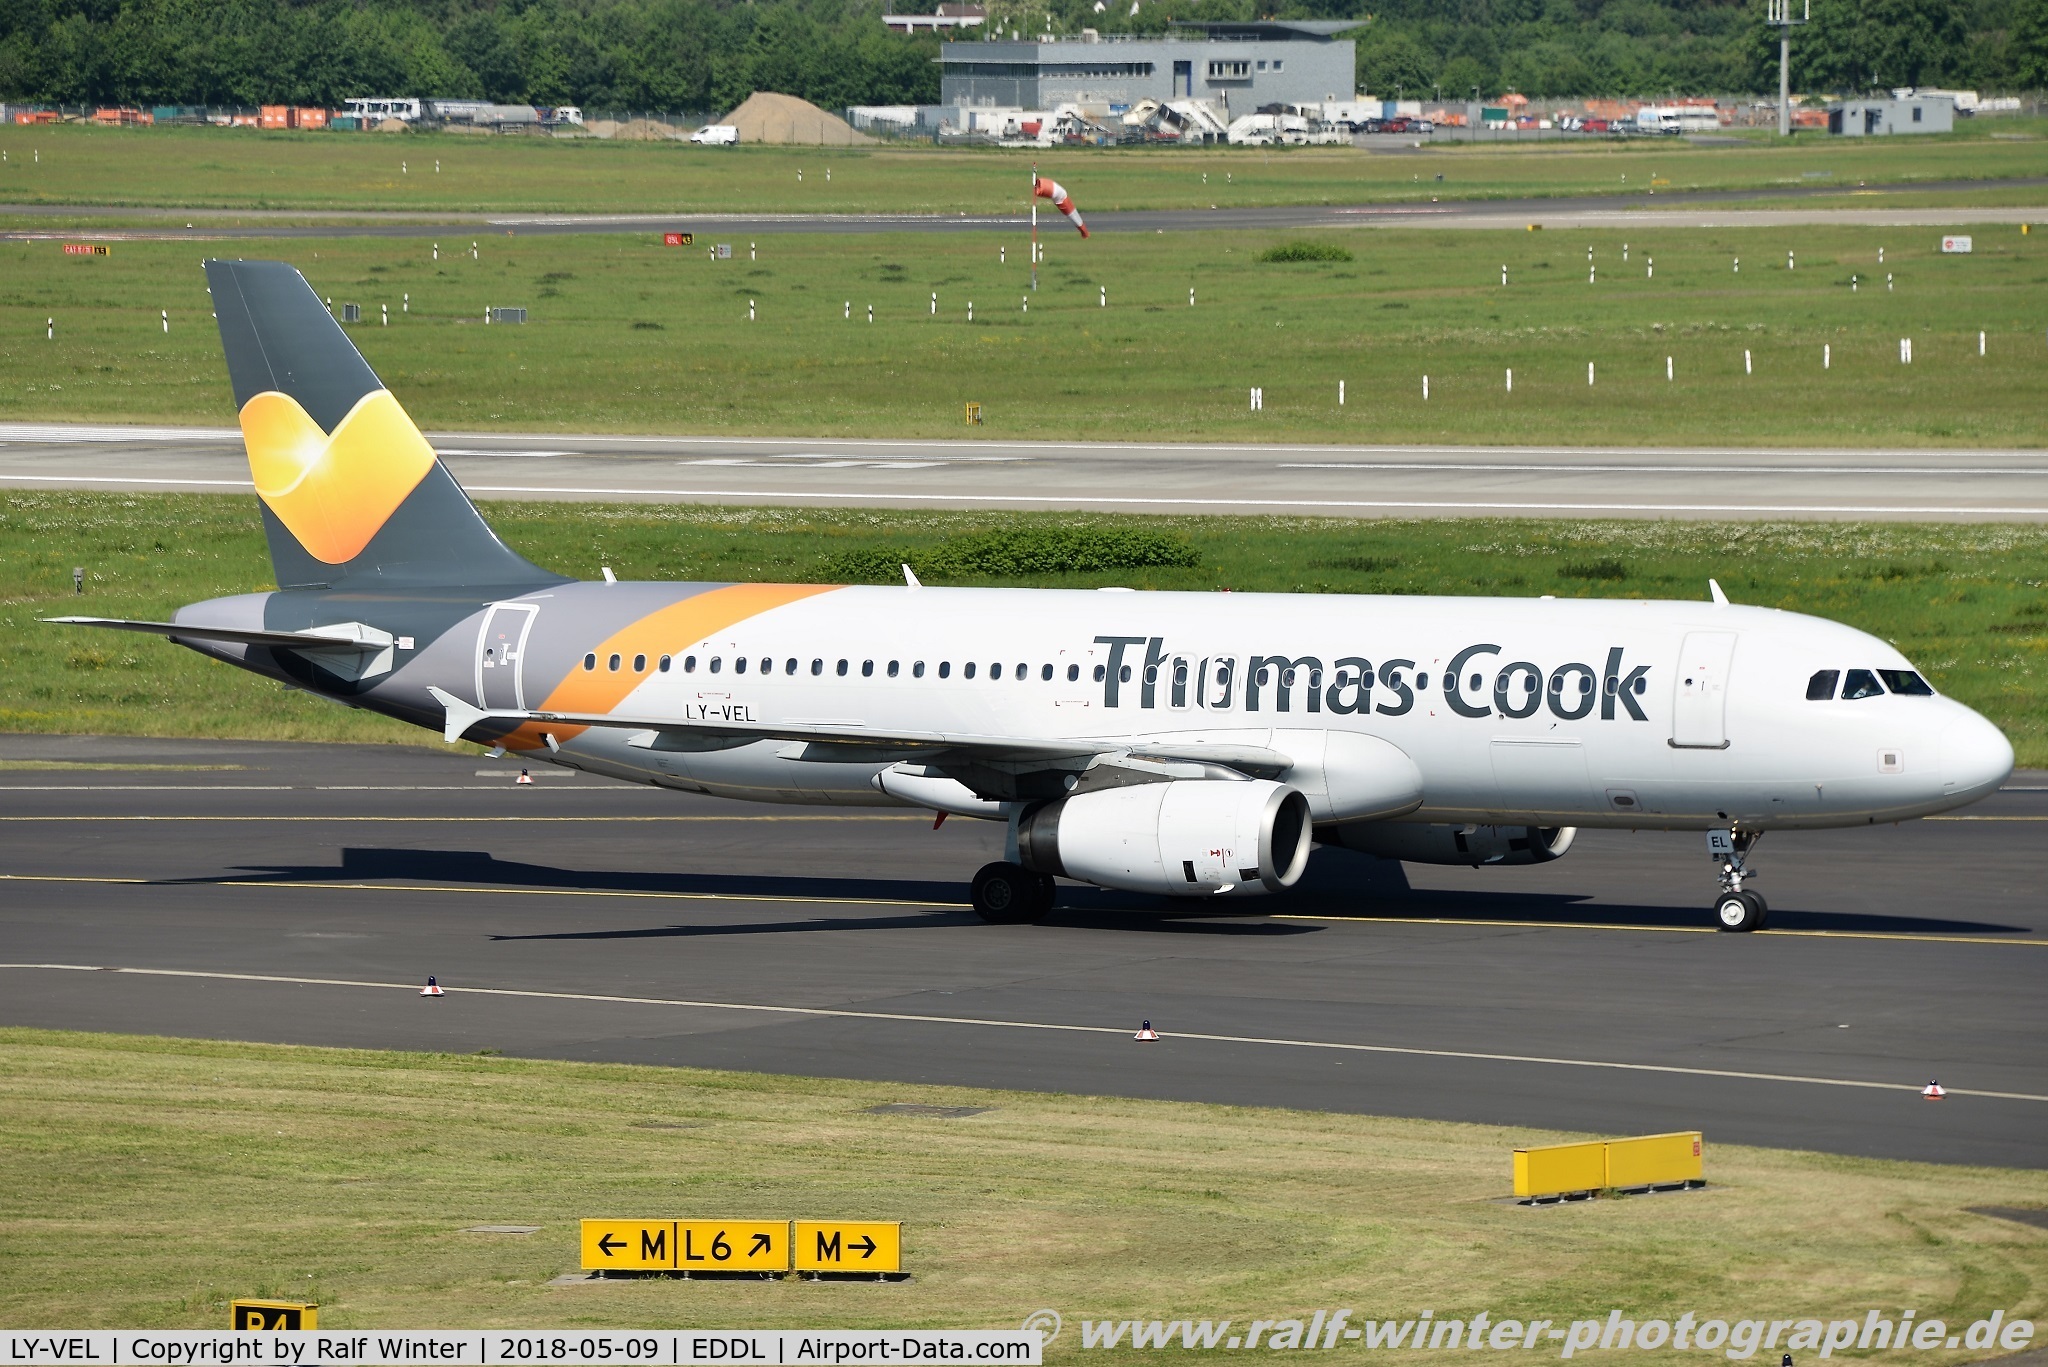 LY-VEL, 2003 Airbus A320-232 C/N 1998, Airbus A320-232 - N9 NVD Avion Express opfor Thomas Cook - 1998 - LY-VEL - 09.05.2018 - DUS